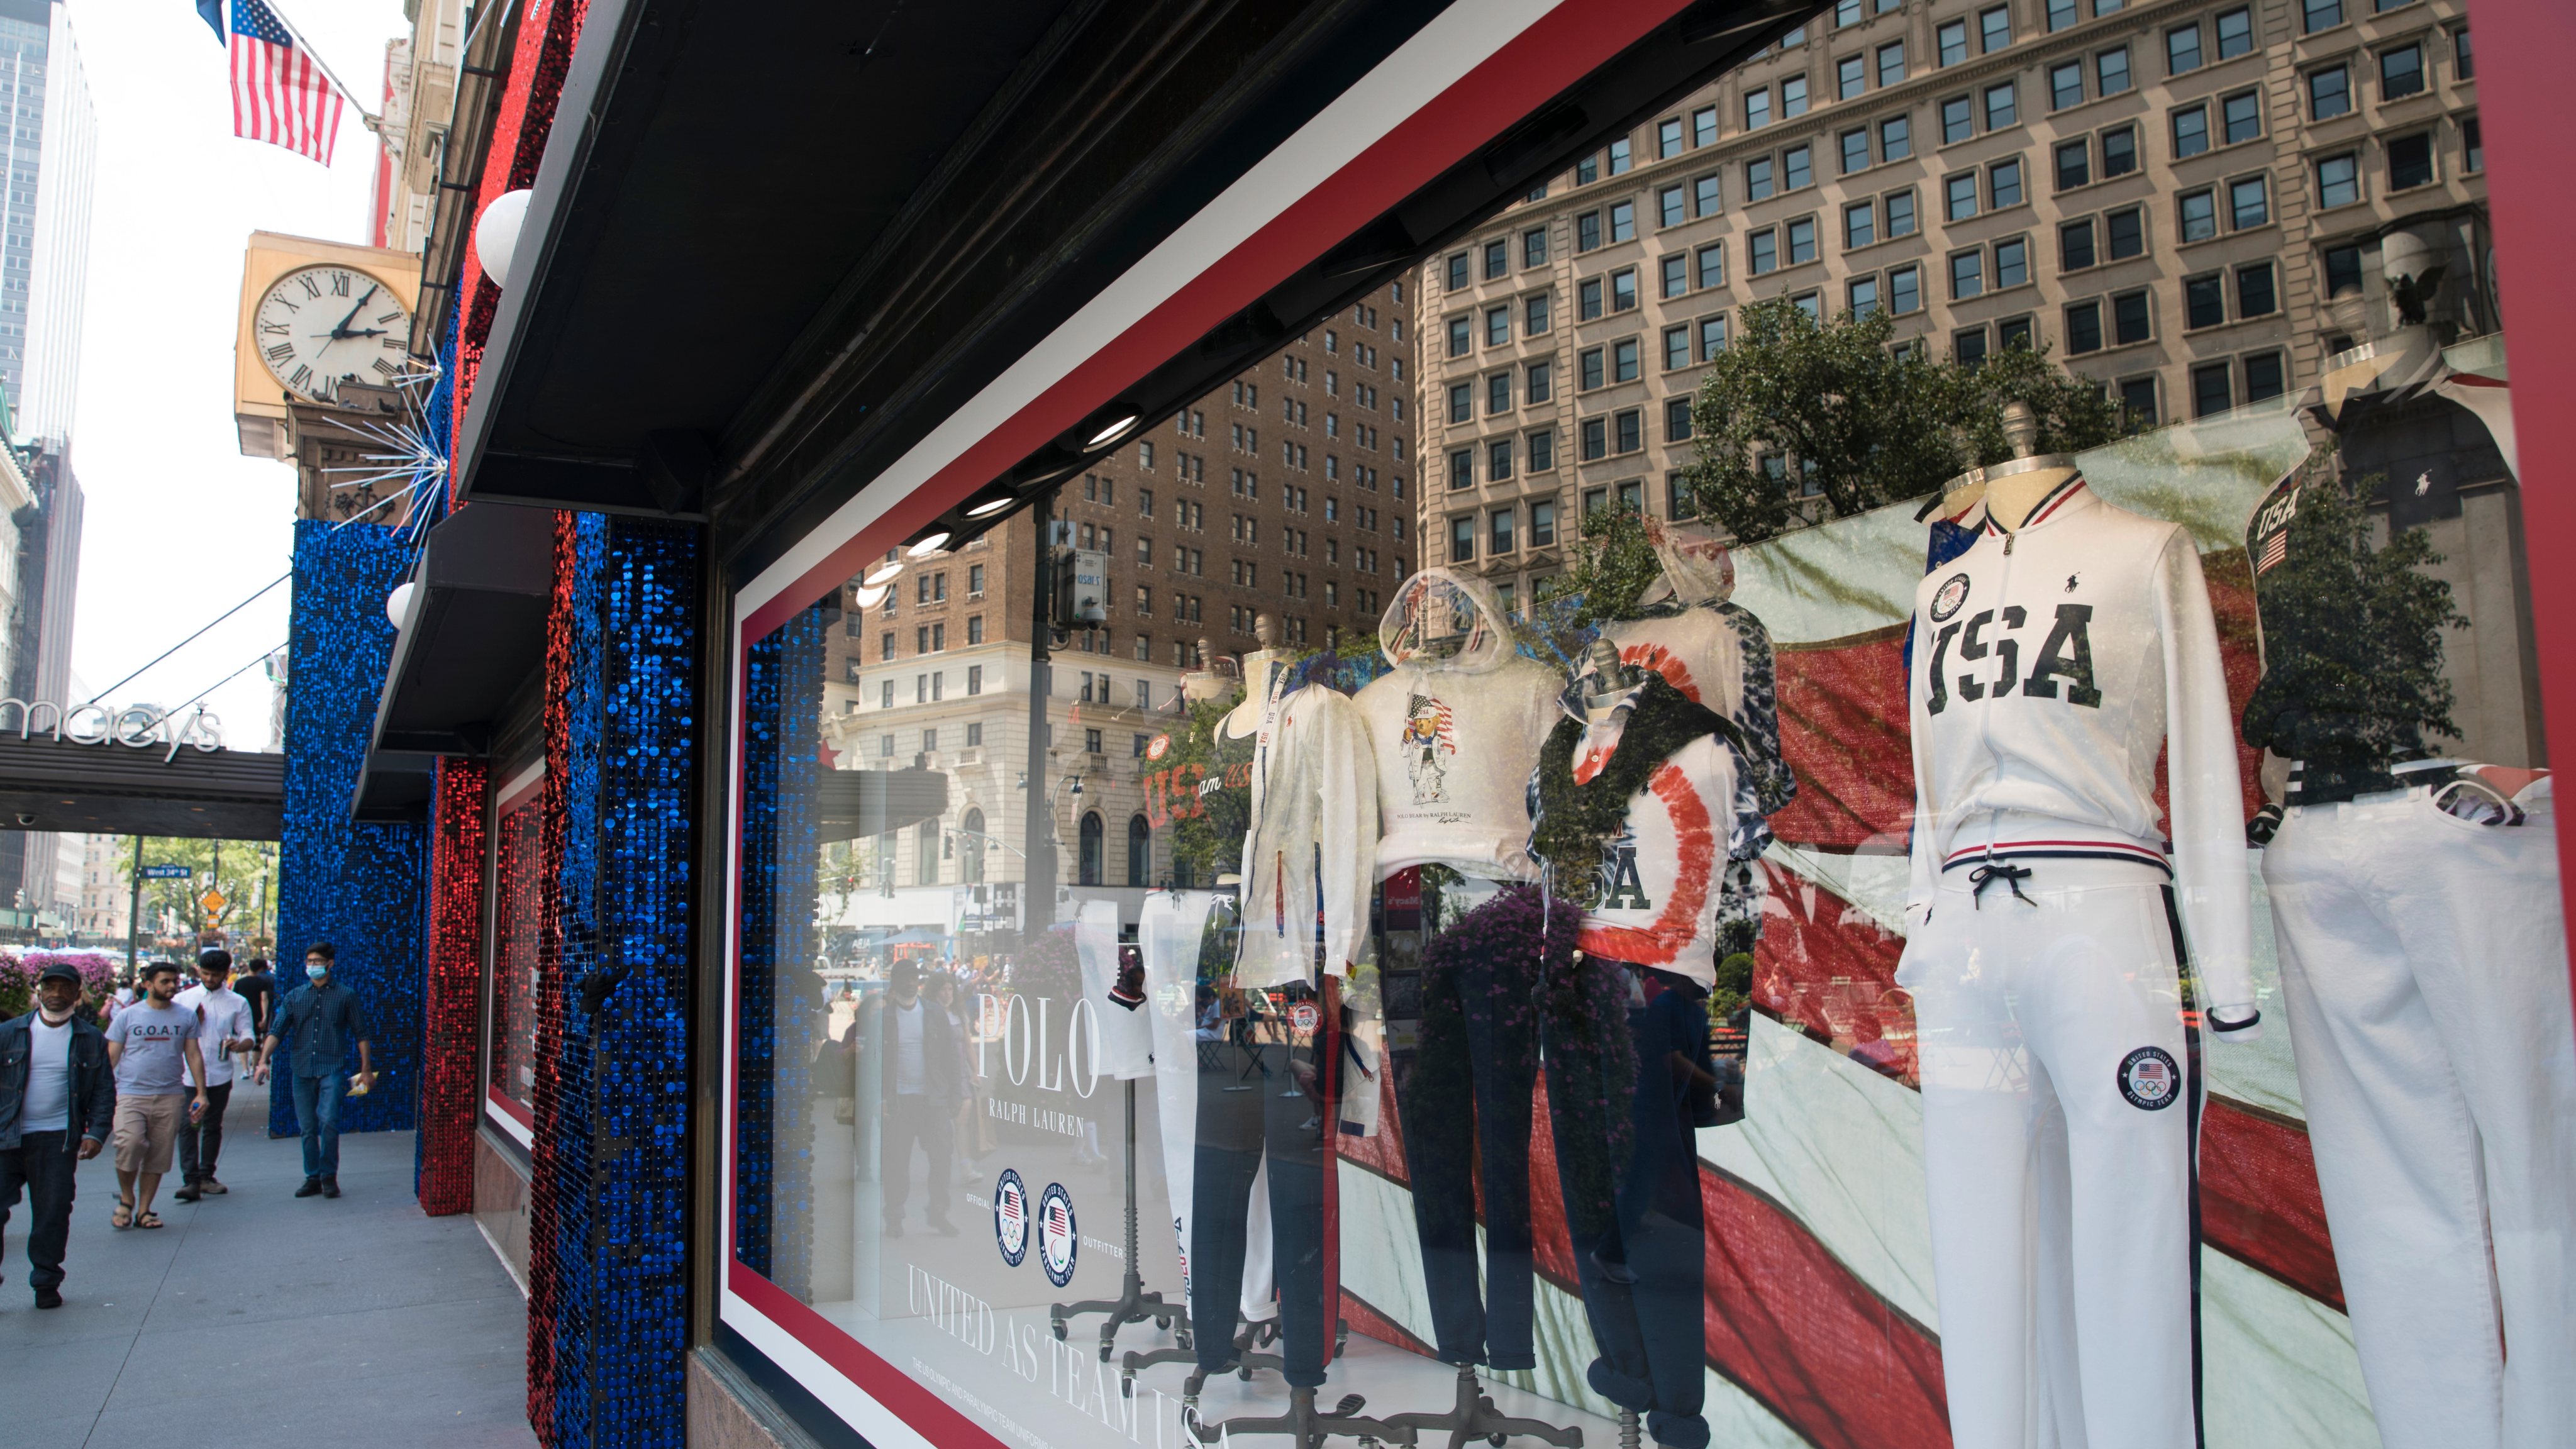 Team USA&#039;s Olympics Outfits Displayed In New York